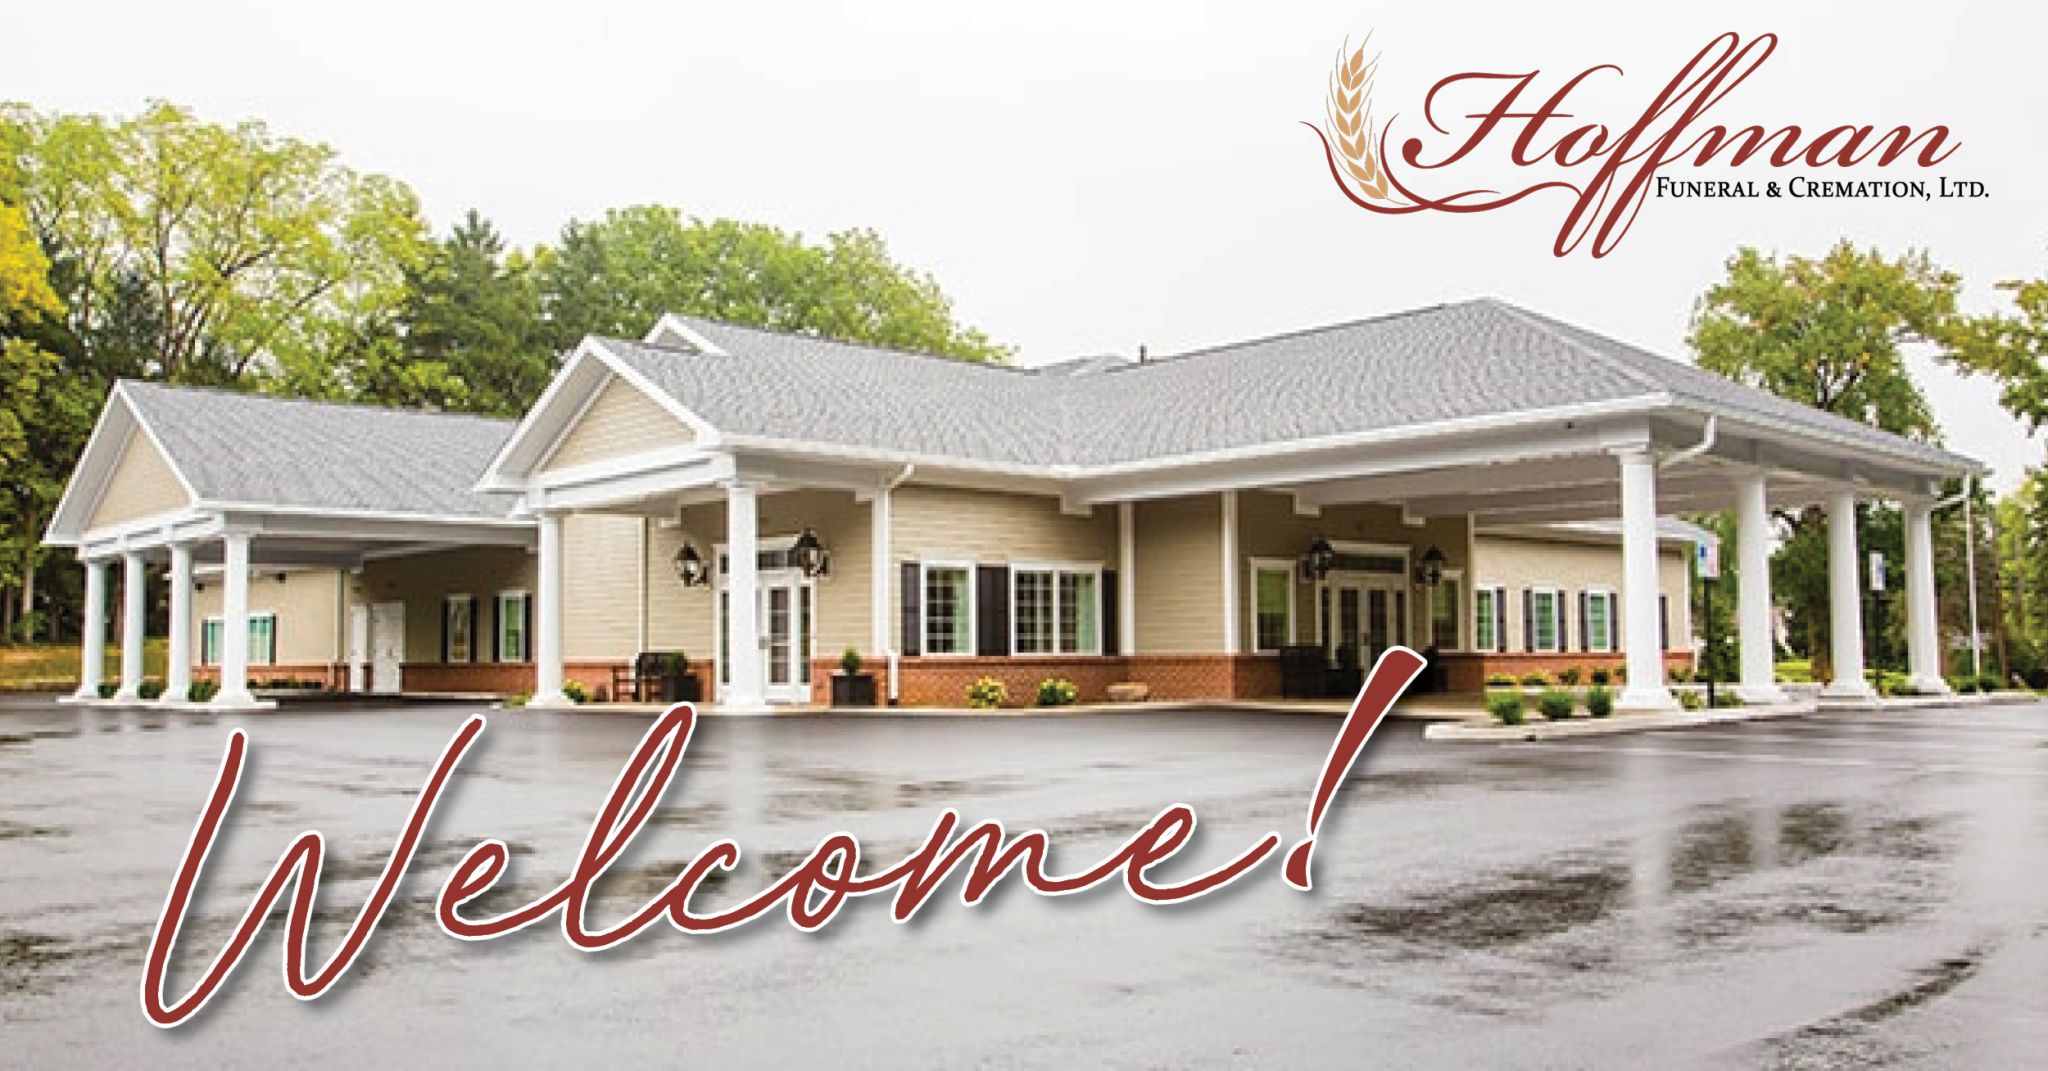 Vertin Family Funeral Homes Acquires Hoffman Funeral Home & Crematory in Pennsylvania